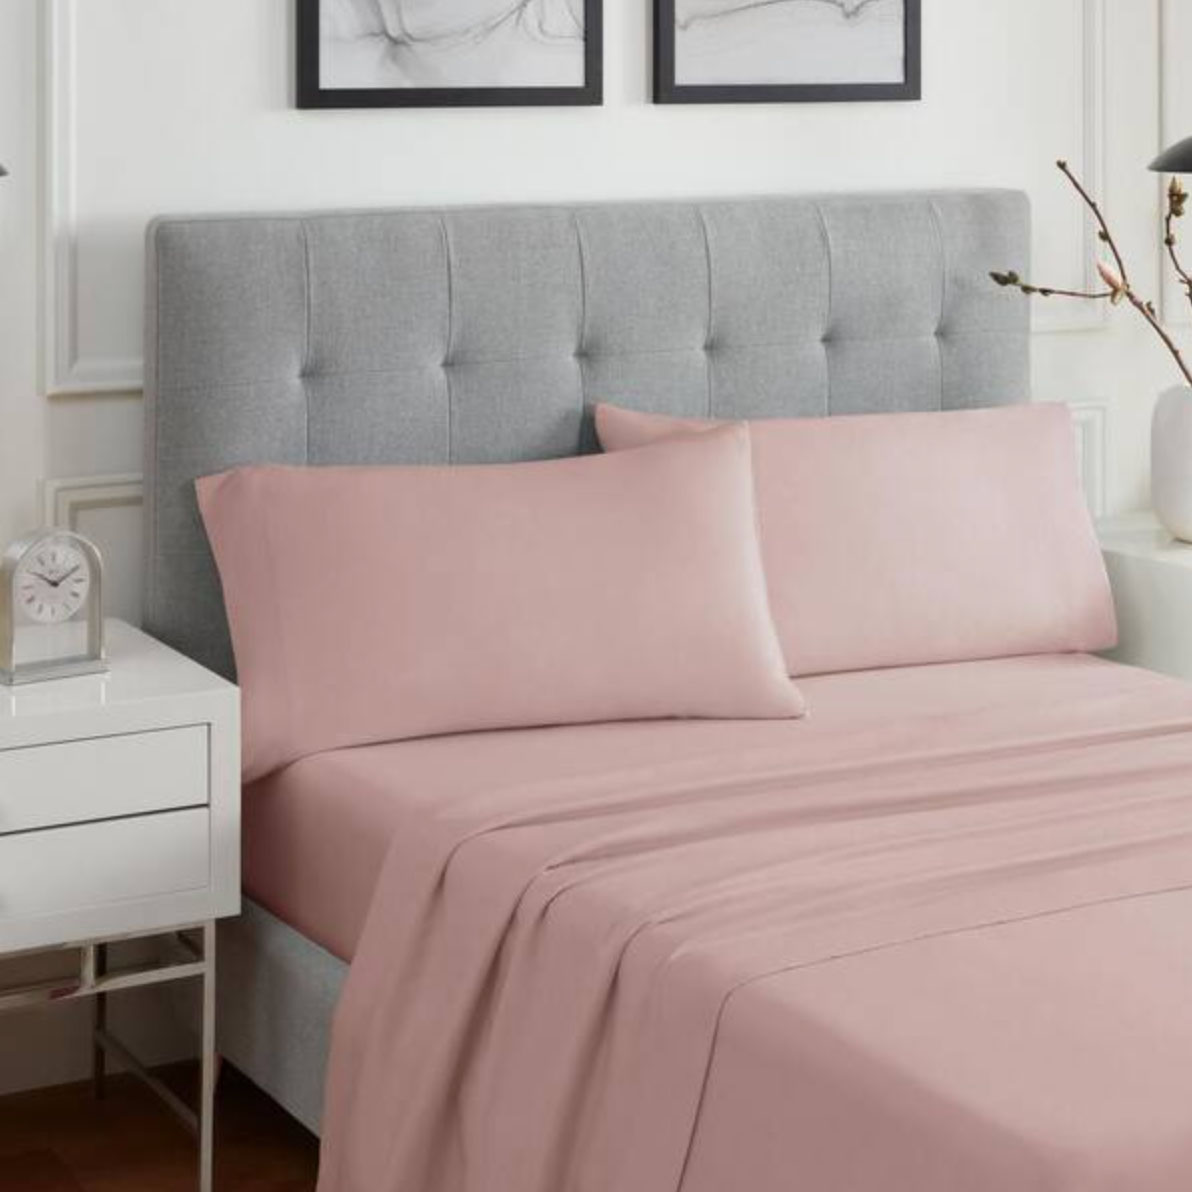 Fitted bedsheet in dusty pink